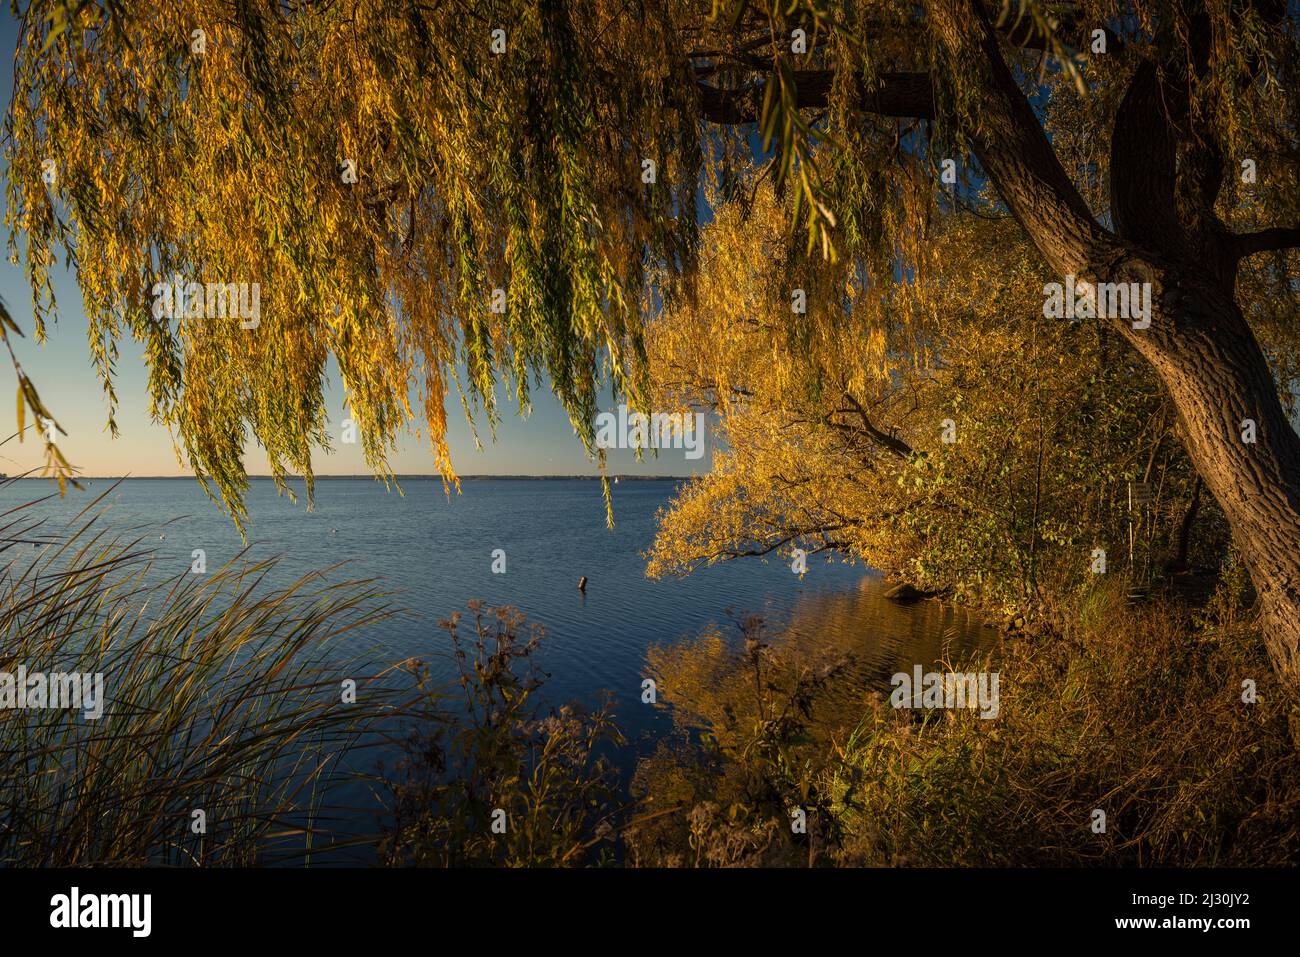 Trees at the Steinhuder Meer in the evening light, Steinhude, Lower Saxony, Germany, Europe Stock Photo